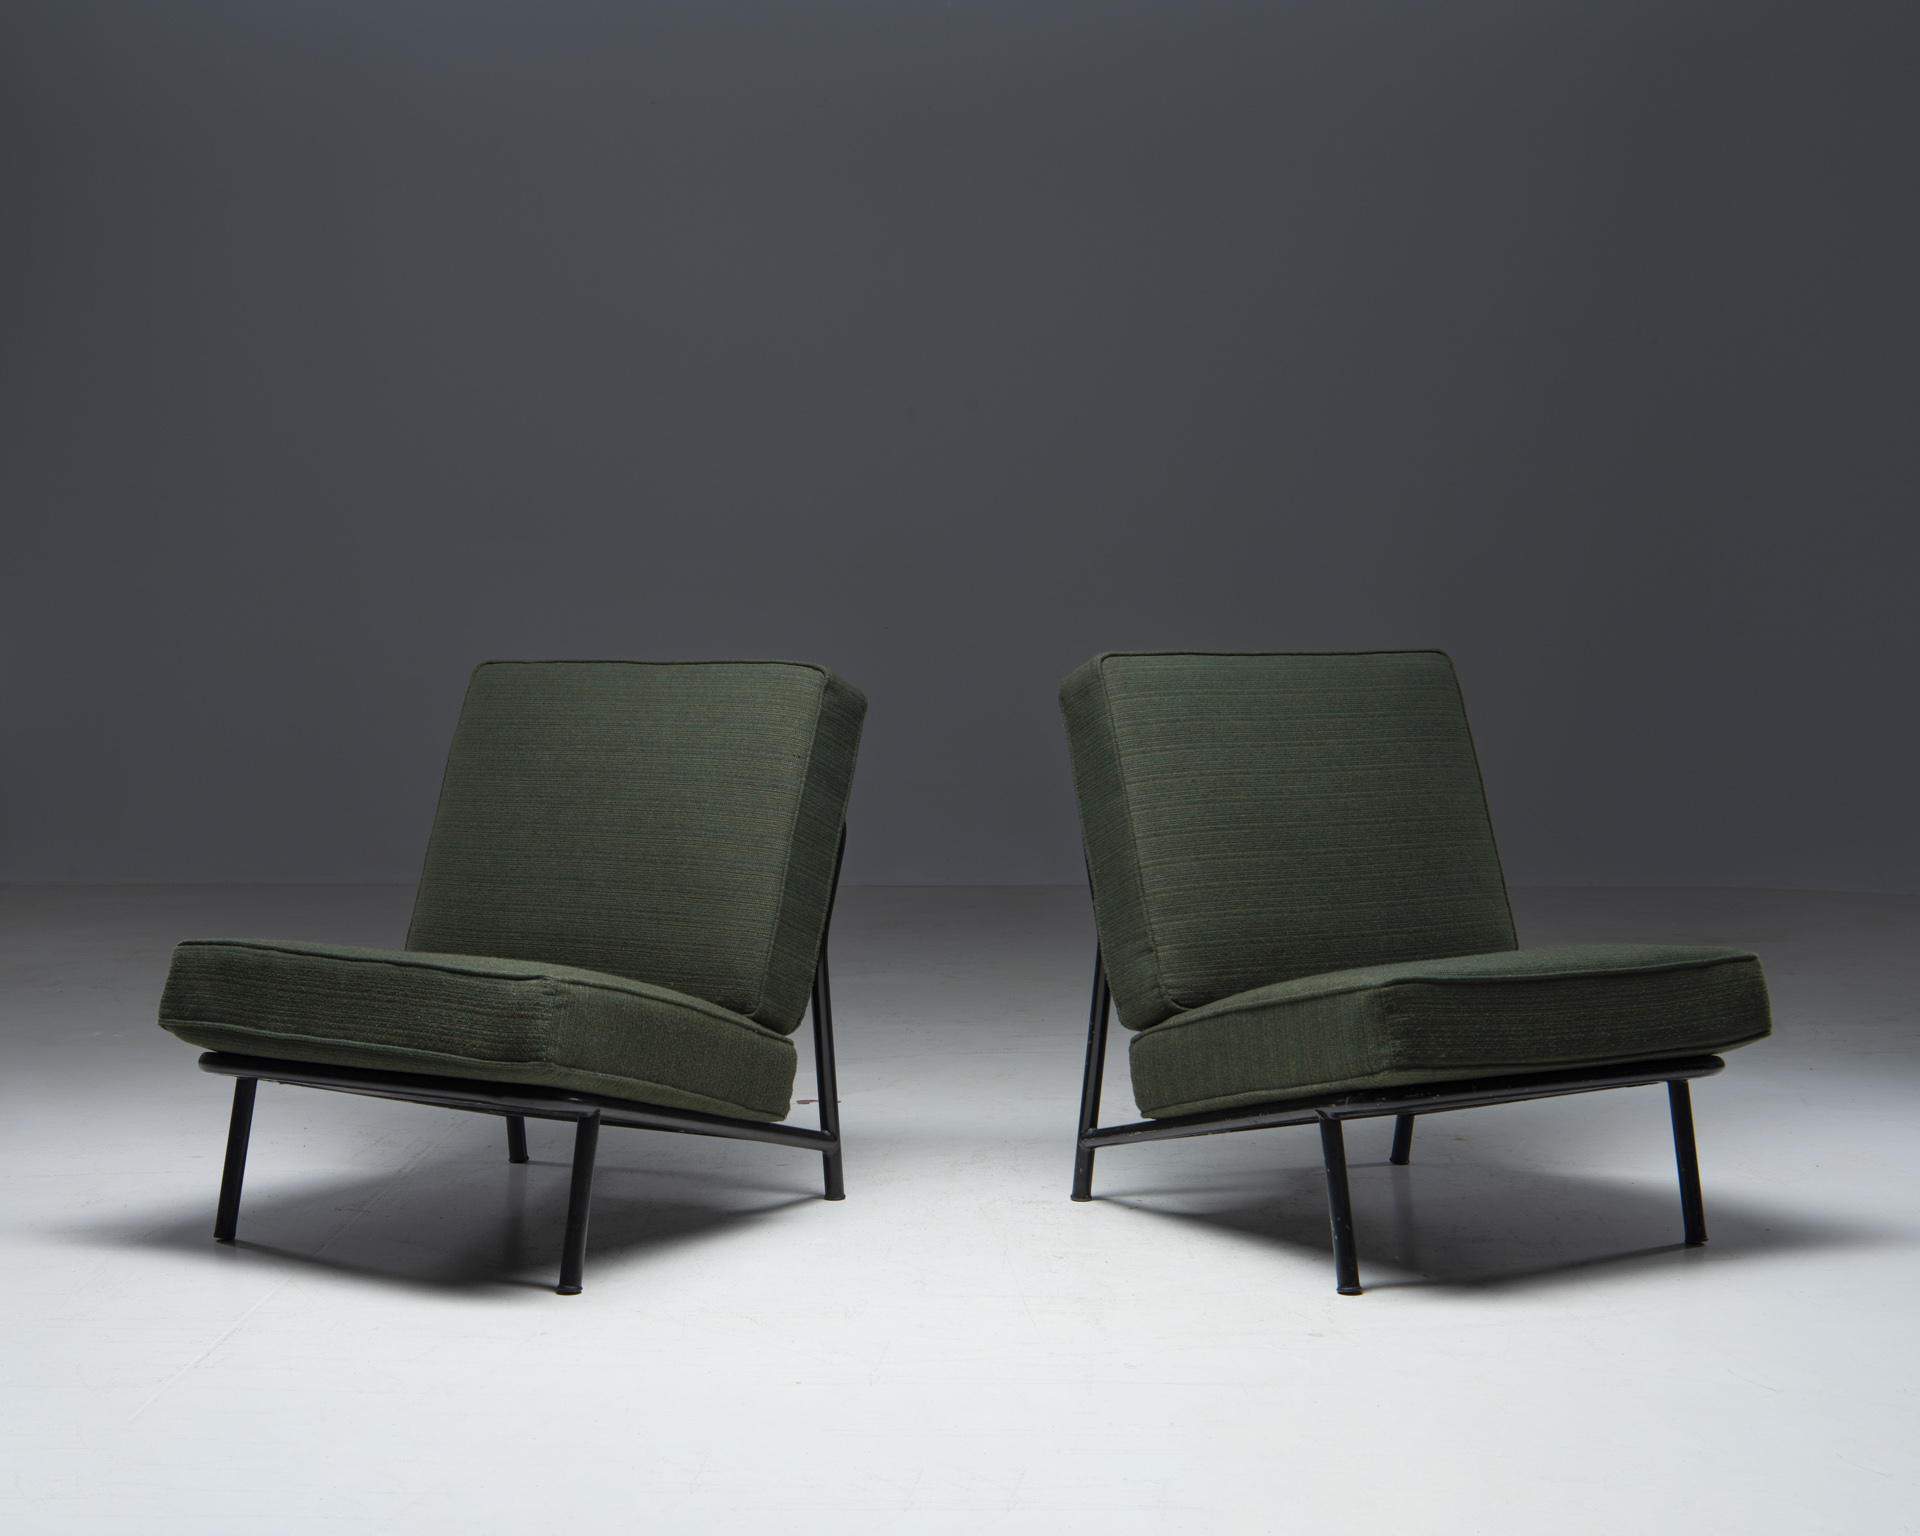 34295-easy-chairs-dux-by-alf-svensson-4